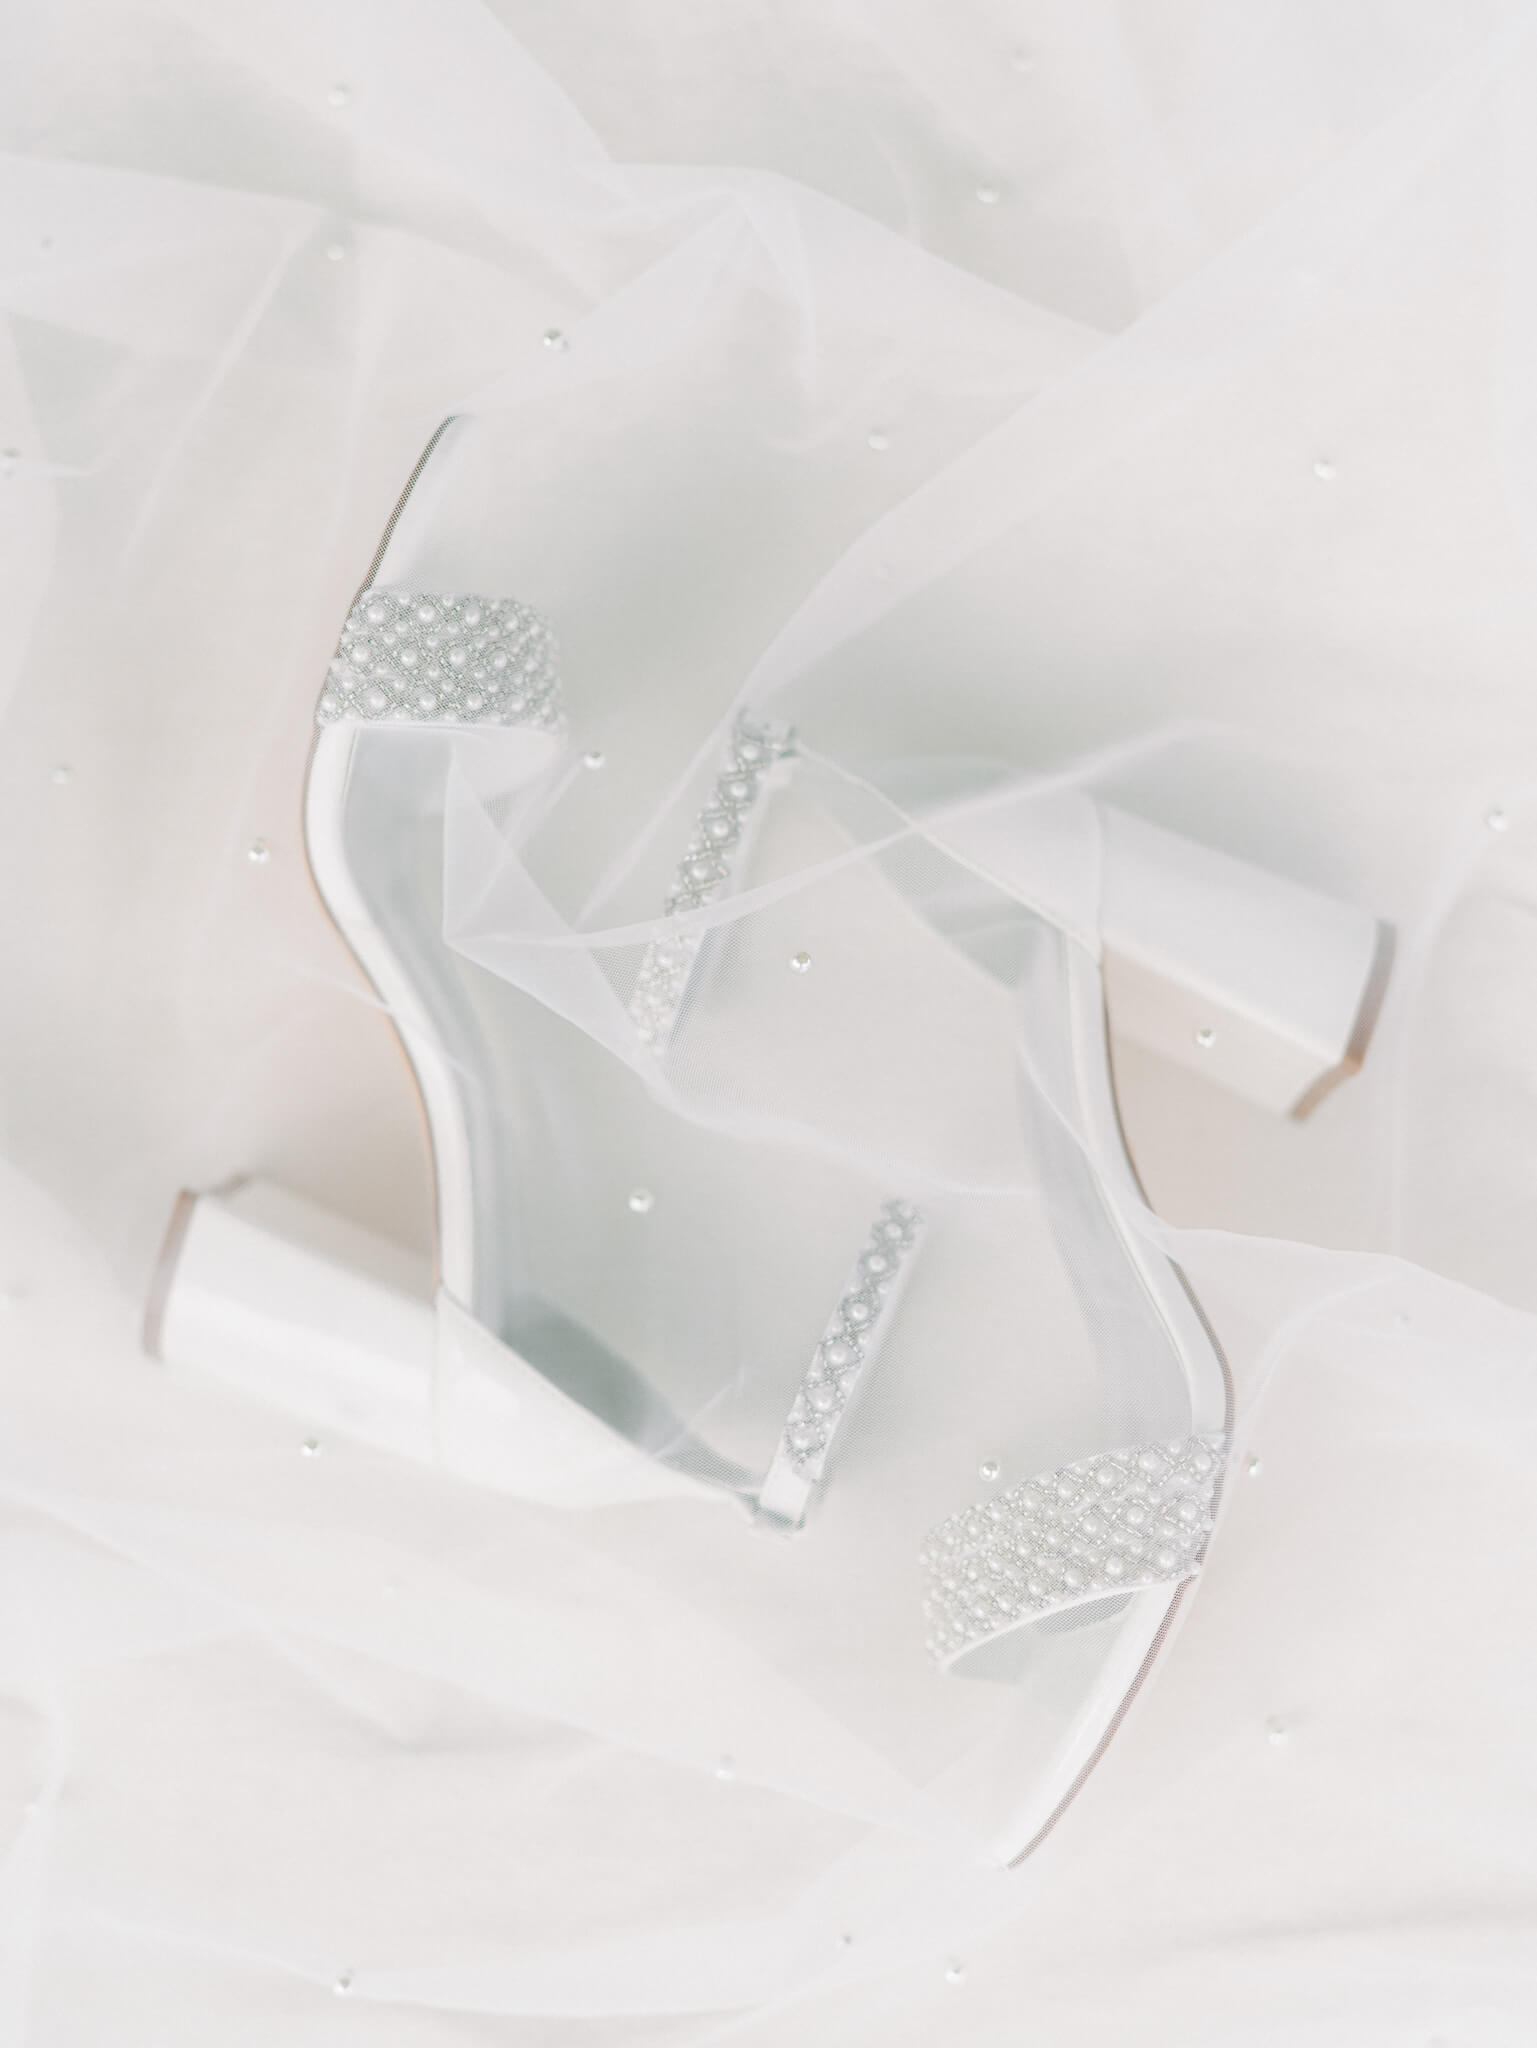 The bride's pearled wedding heels laying under her veil.